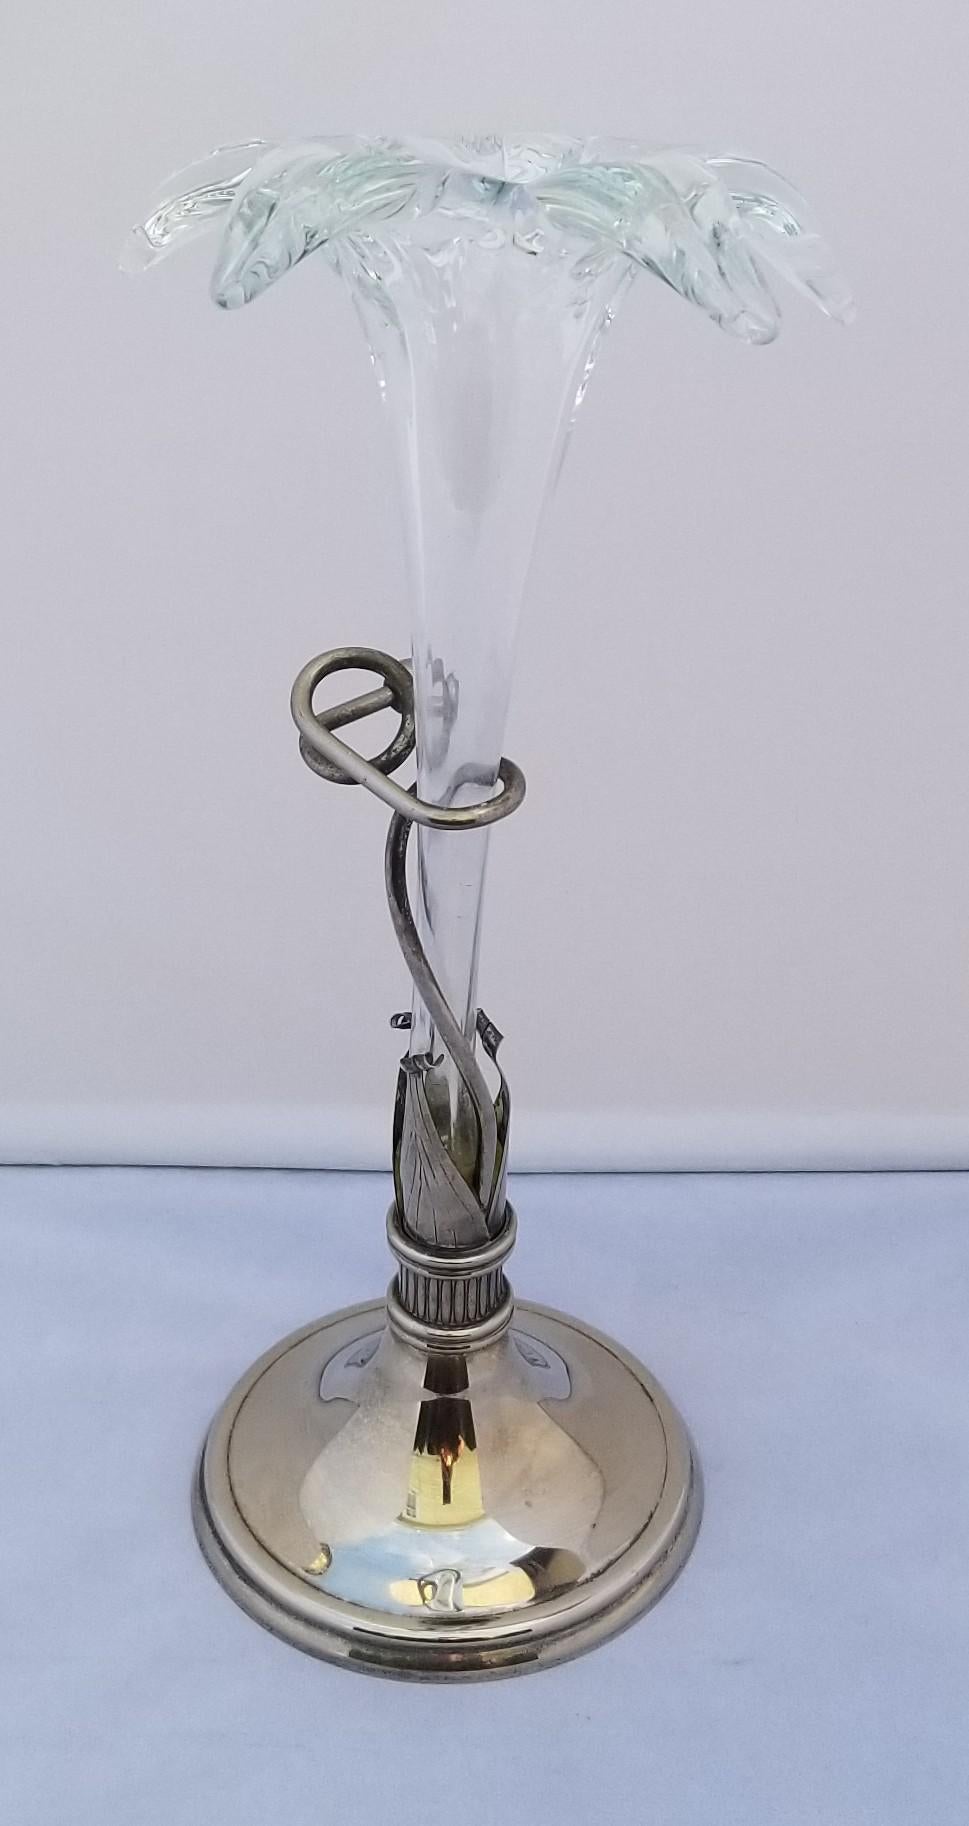 A rare beauty with intricate hand-blown glass in the shape of a lily, a silver or silver plated base with tendrils gently cradling the stem of the flower. This vase is likely from the 1980s, but is clearly heavily influenced by the art nouveau